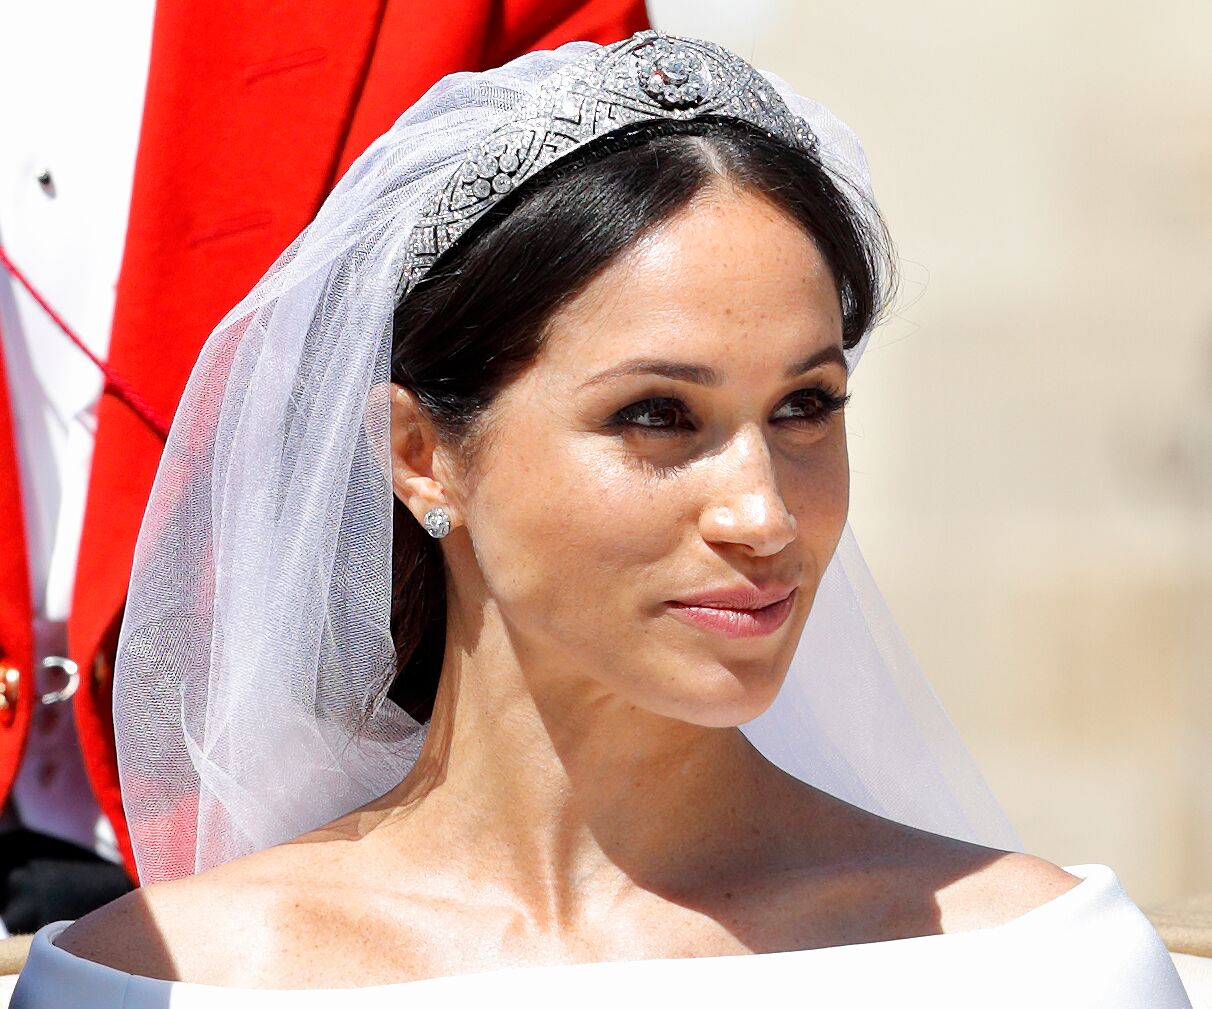 Duchess of Sussex  after her wedding at St George's Chapel | Getty Images